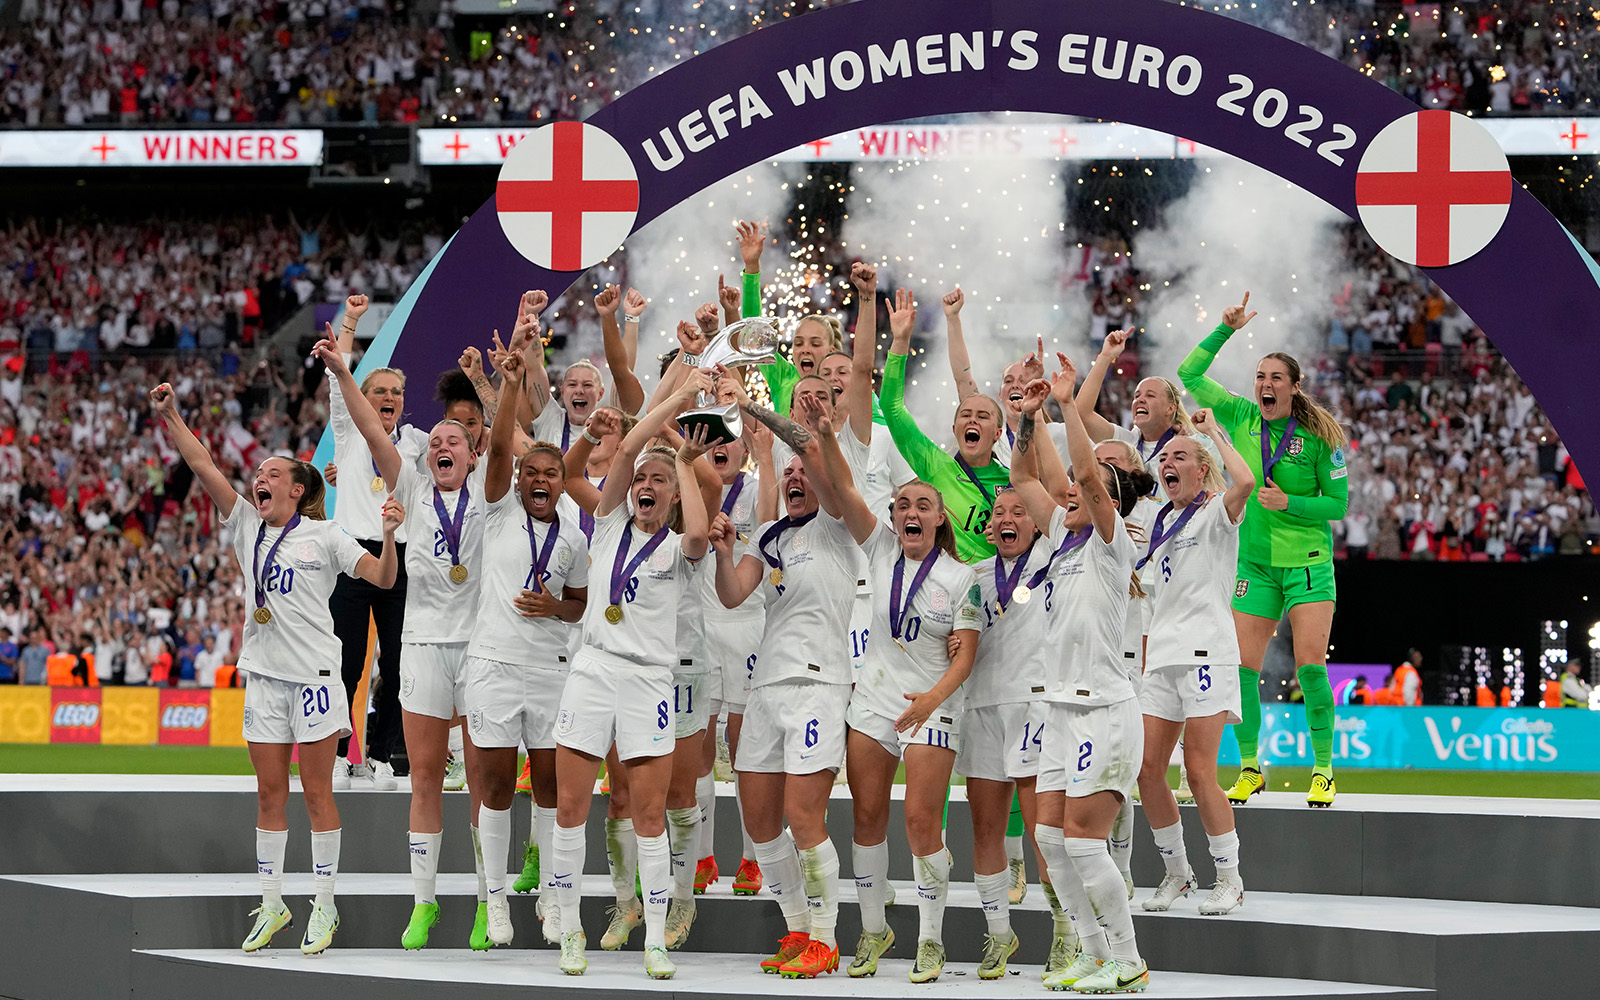 'The world will change' England's soccer team sweeps to Women's Euro